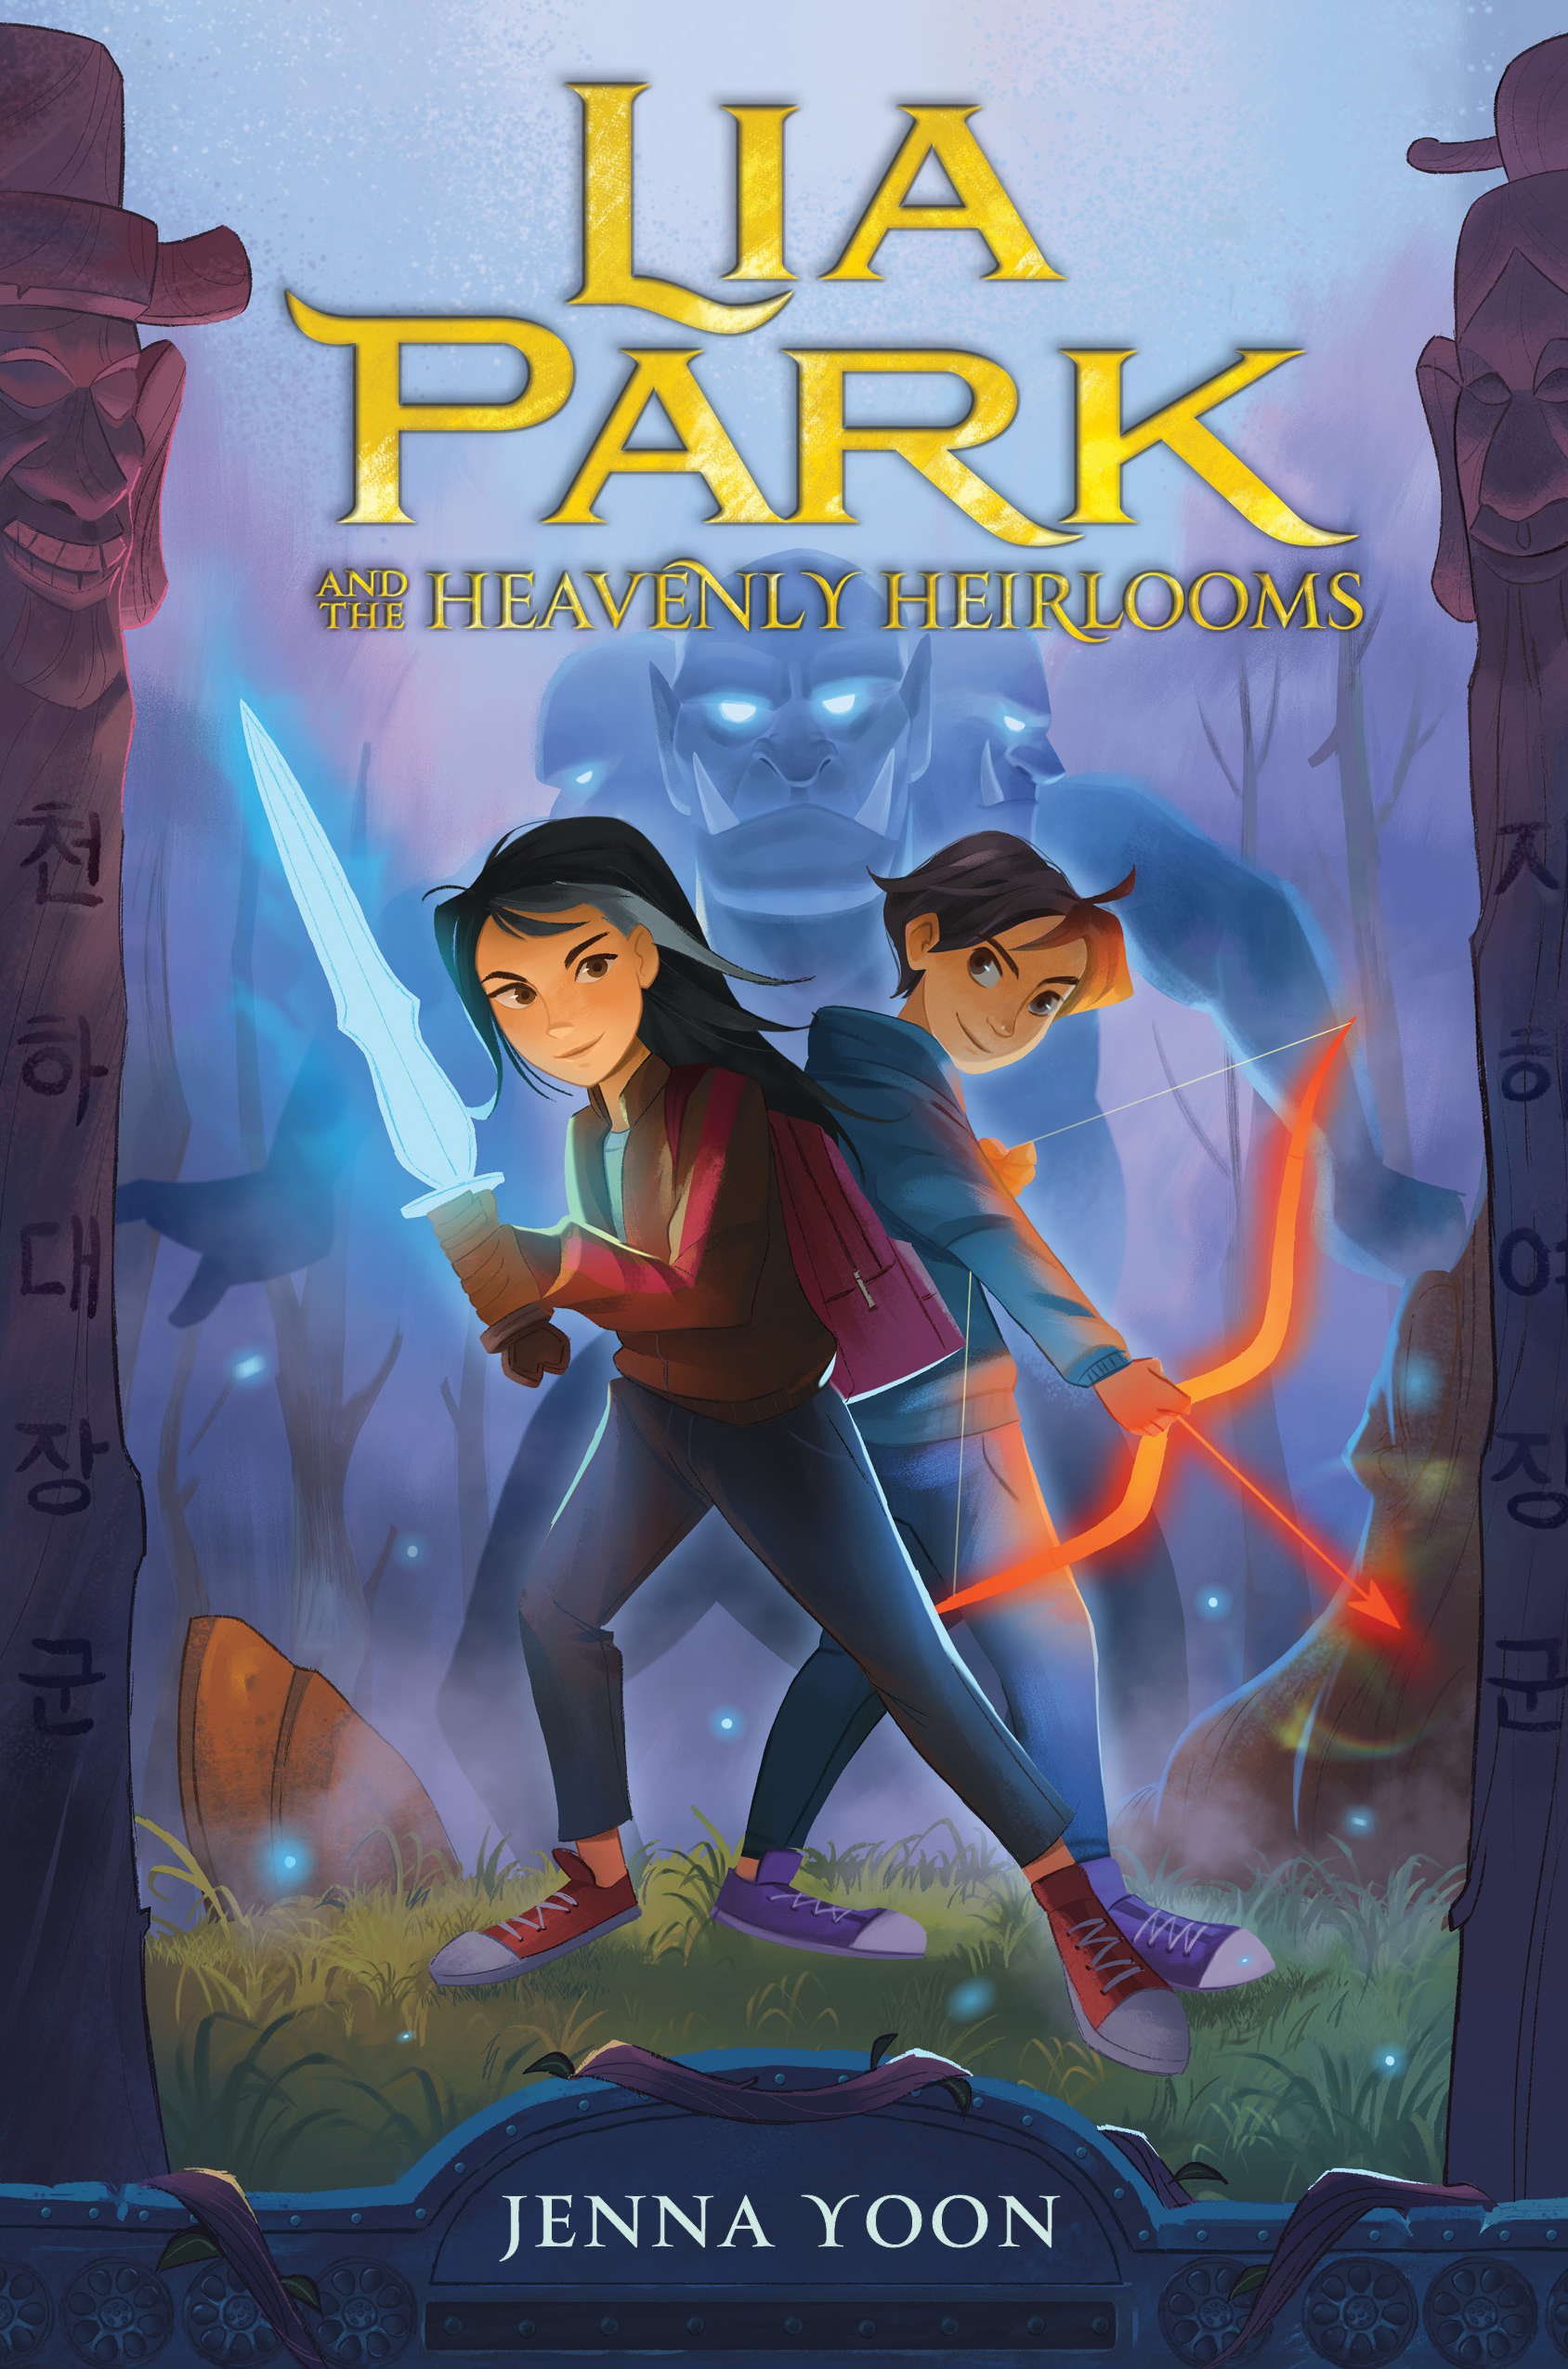 When Passions Collide to Create Books for Kids, a guest post by Jenna Yoon